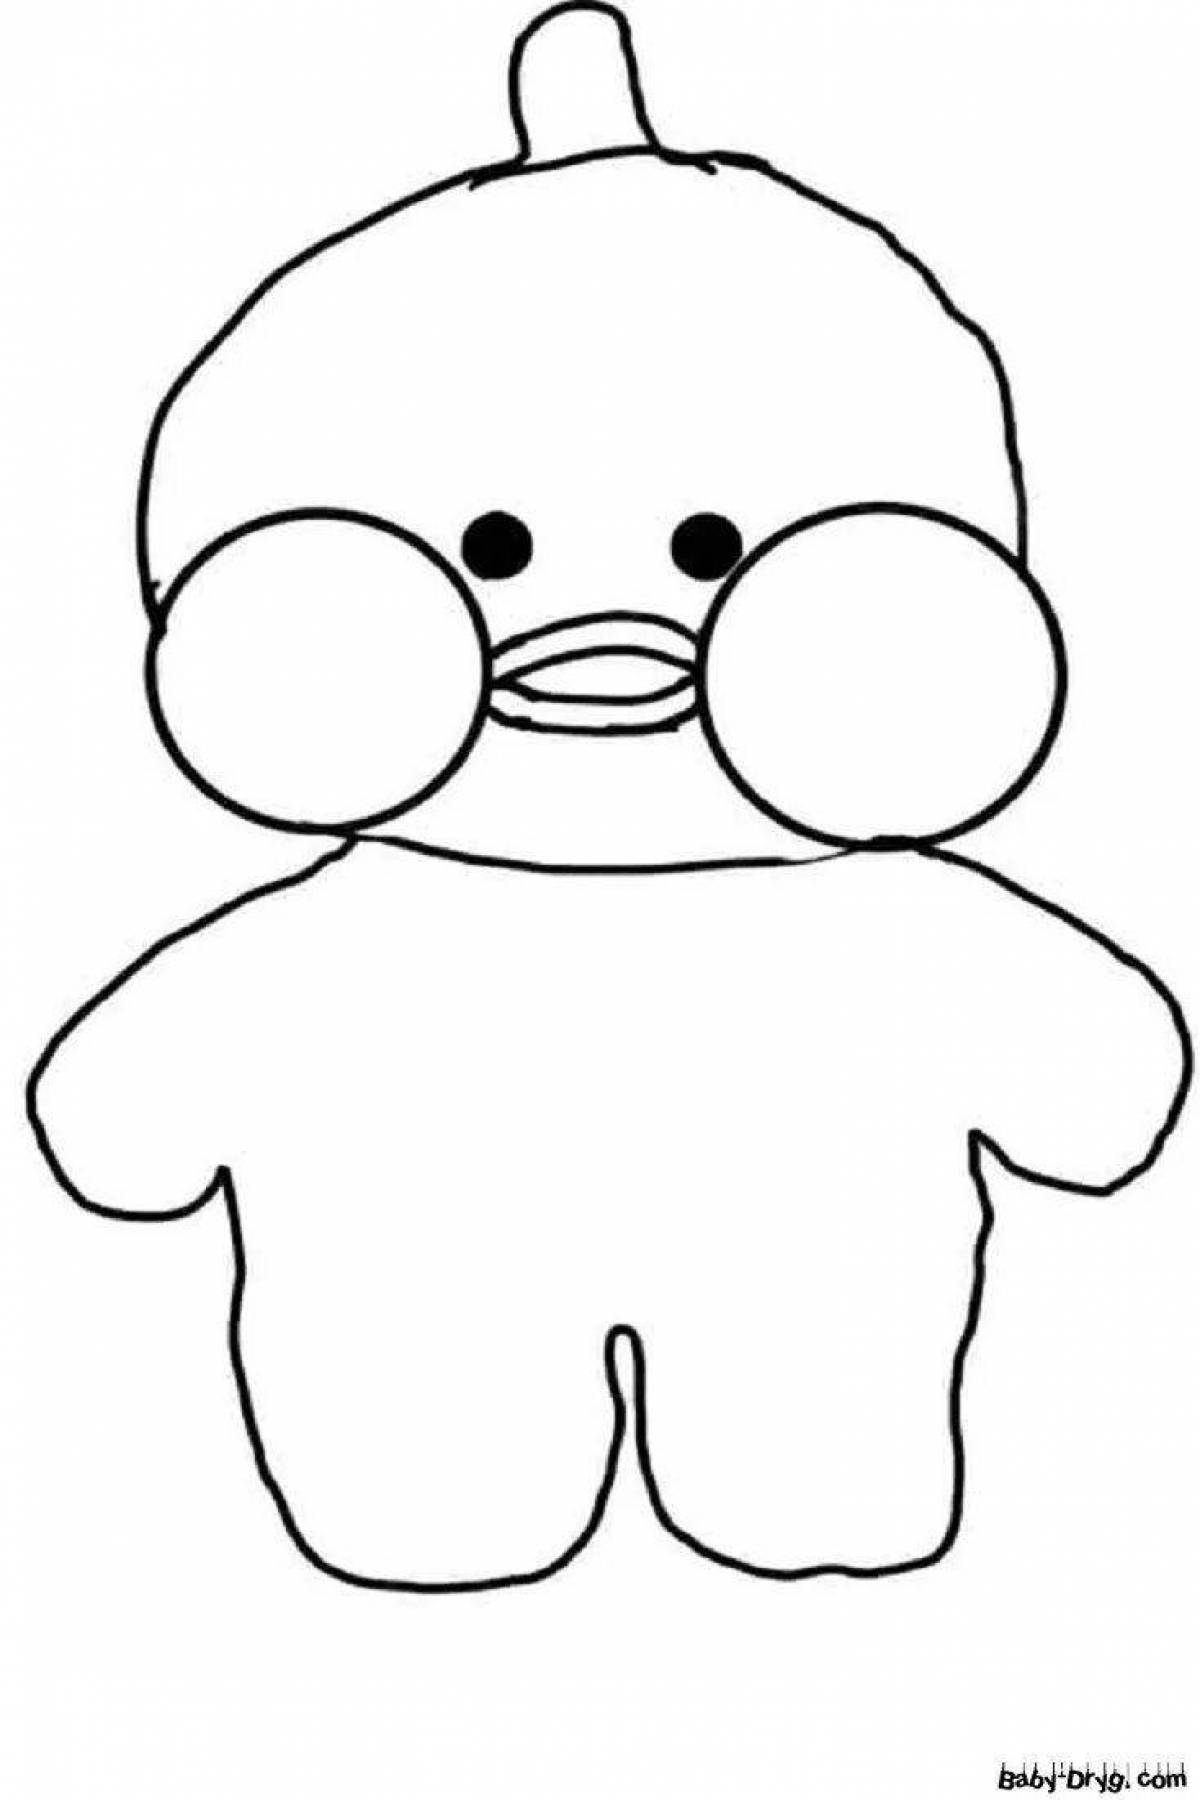 Coloring book brightly dressed duck